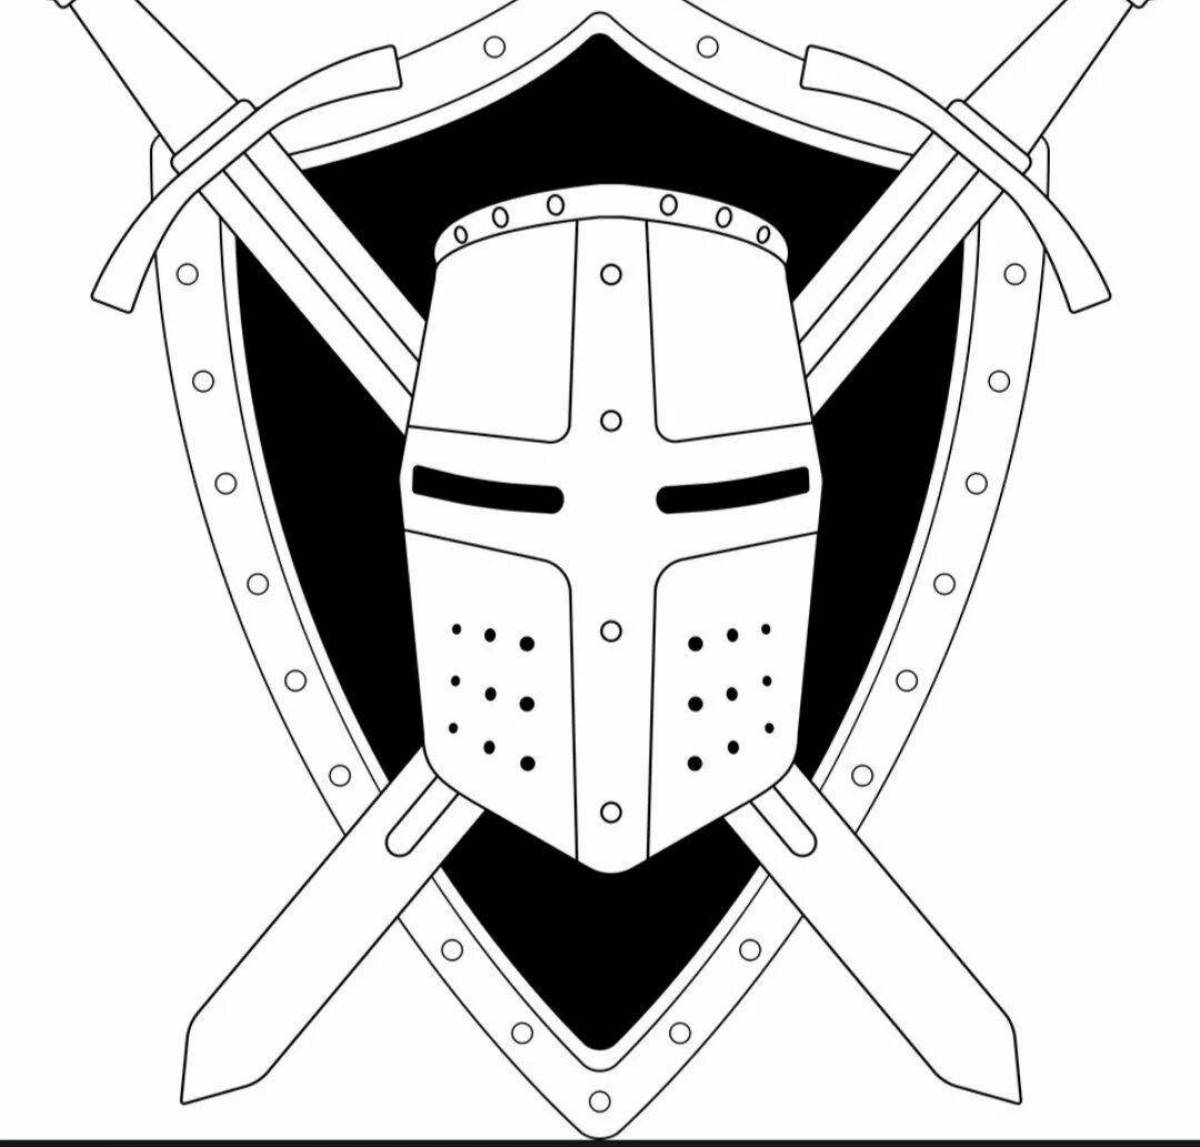 Knight's coat of arms #4